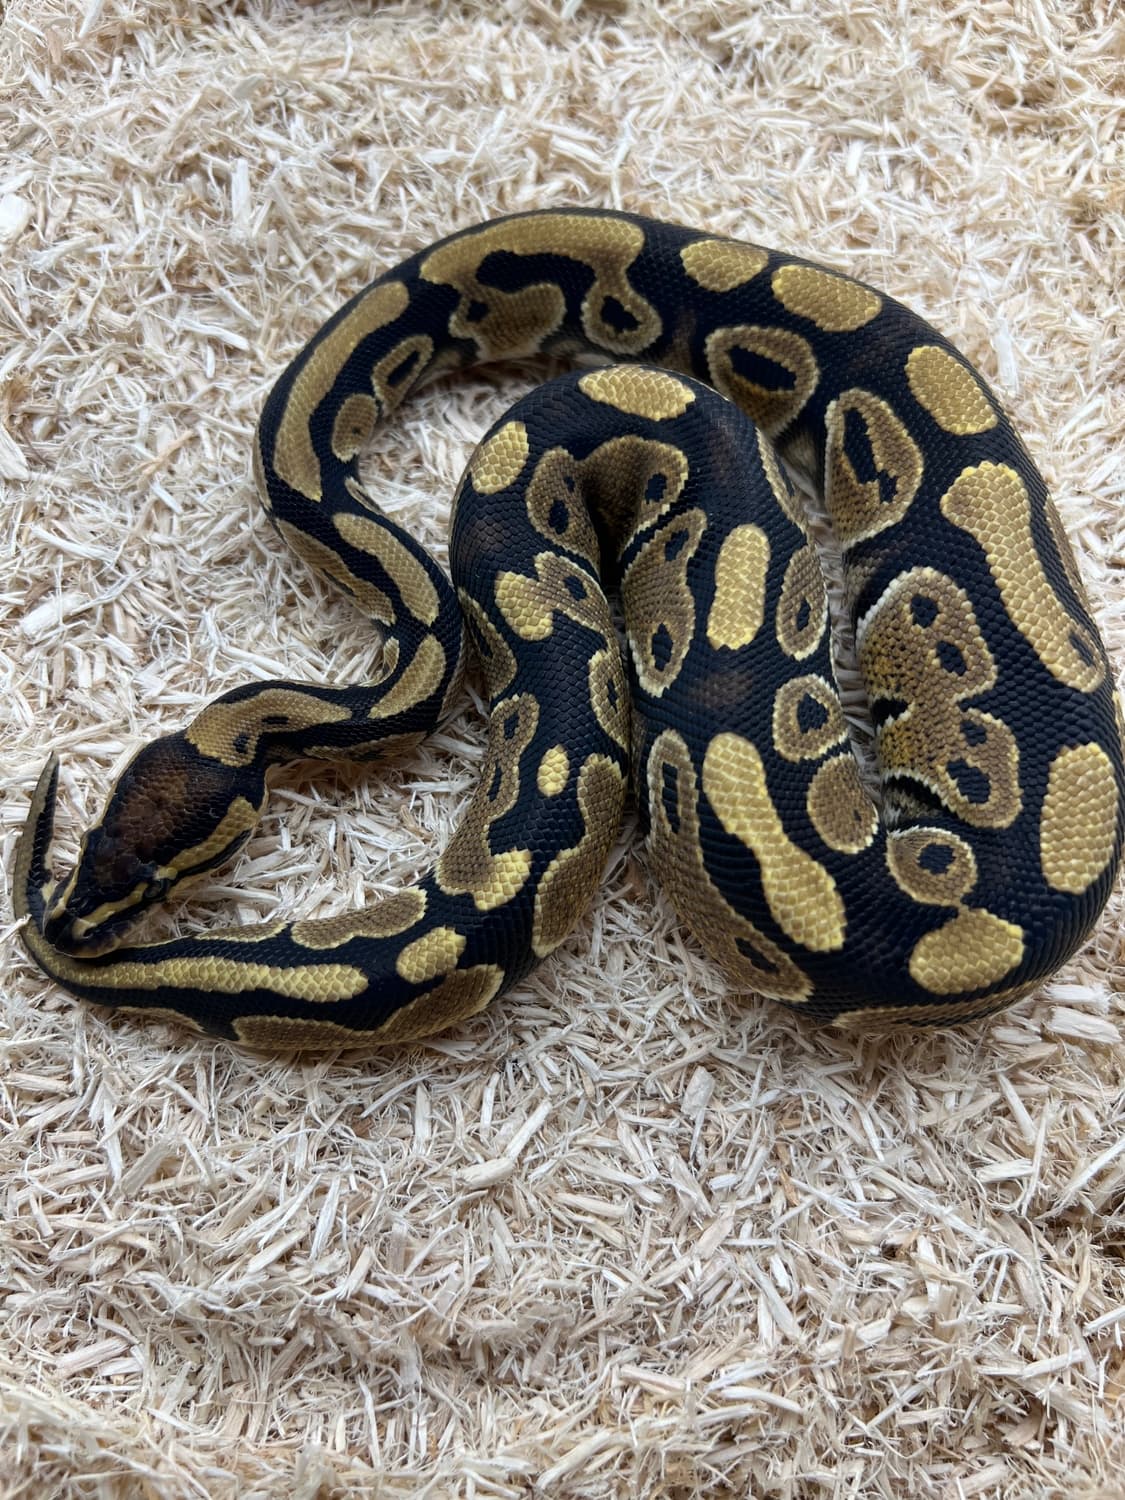 Special Ball Python by Prehistoric Pets